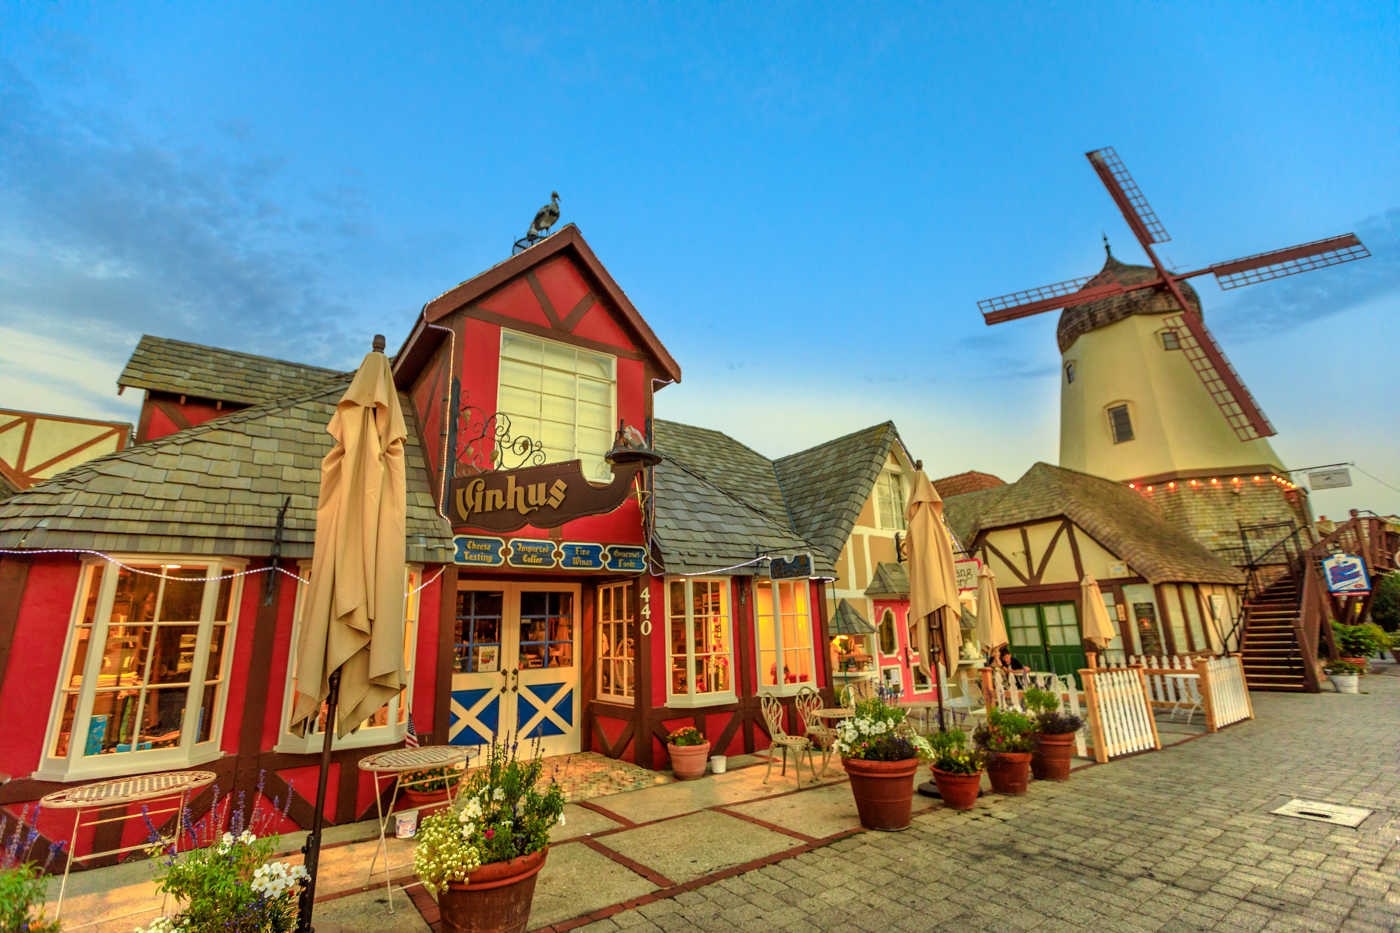 13+ Awesome Things To Do In Solvang, California You'll Love